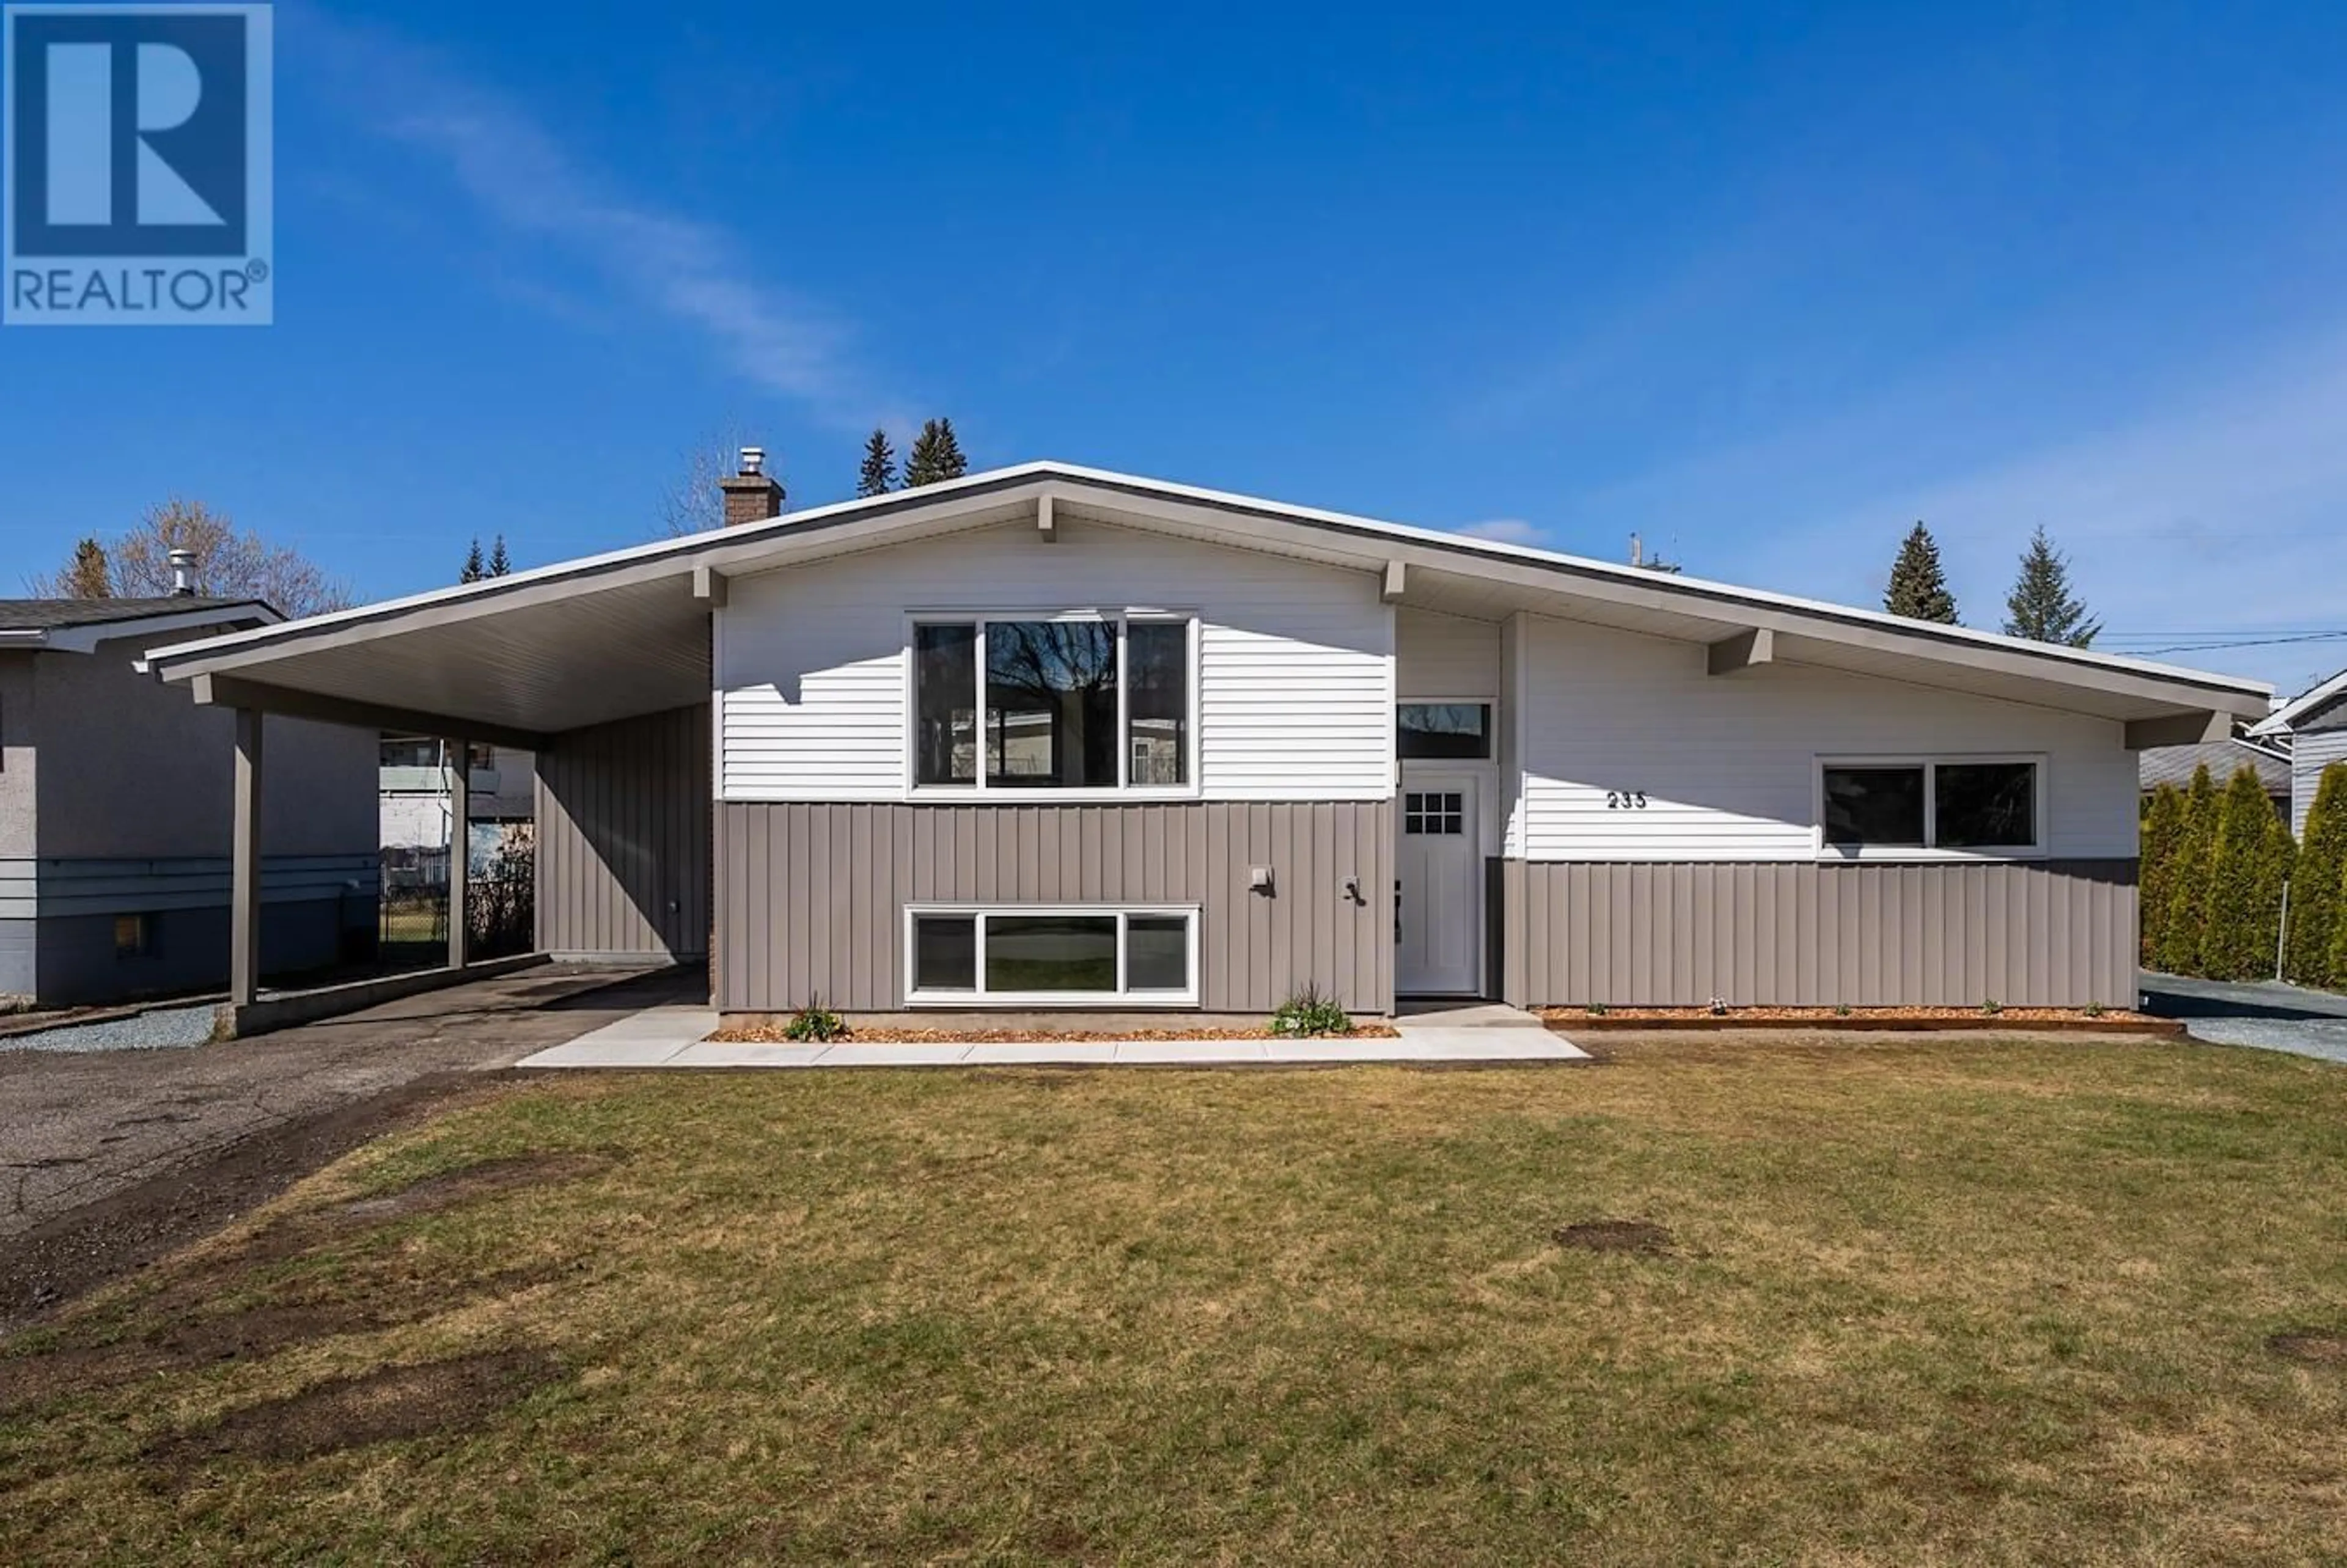 Frontside or backside of a home for 235 N LYON STREET, Prince George British Columbia V2M3E9